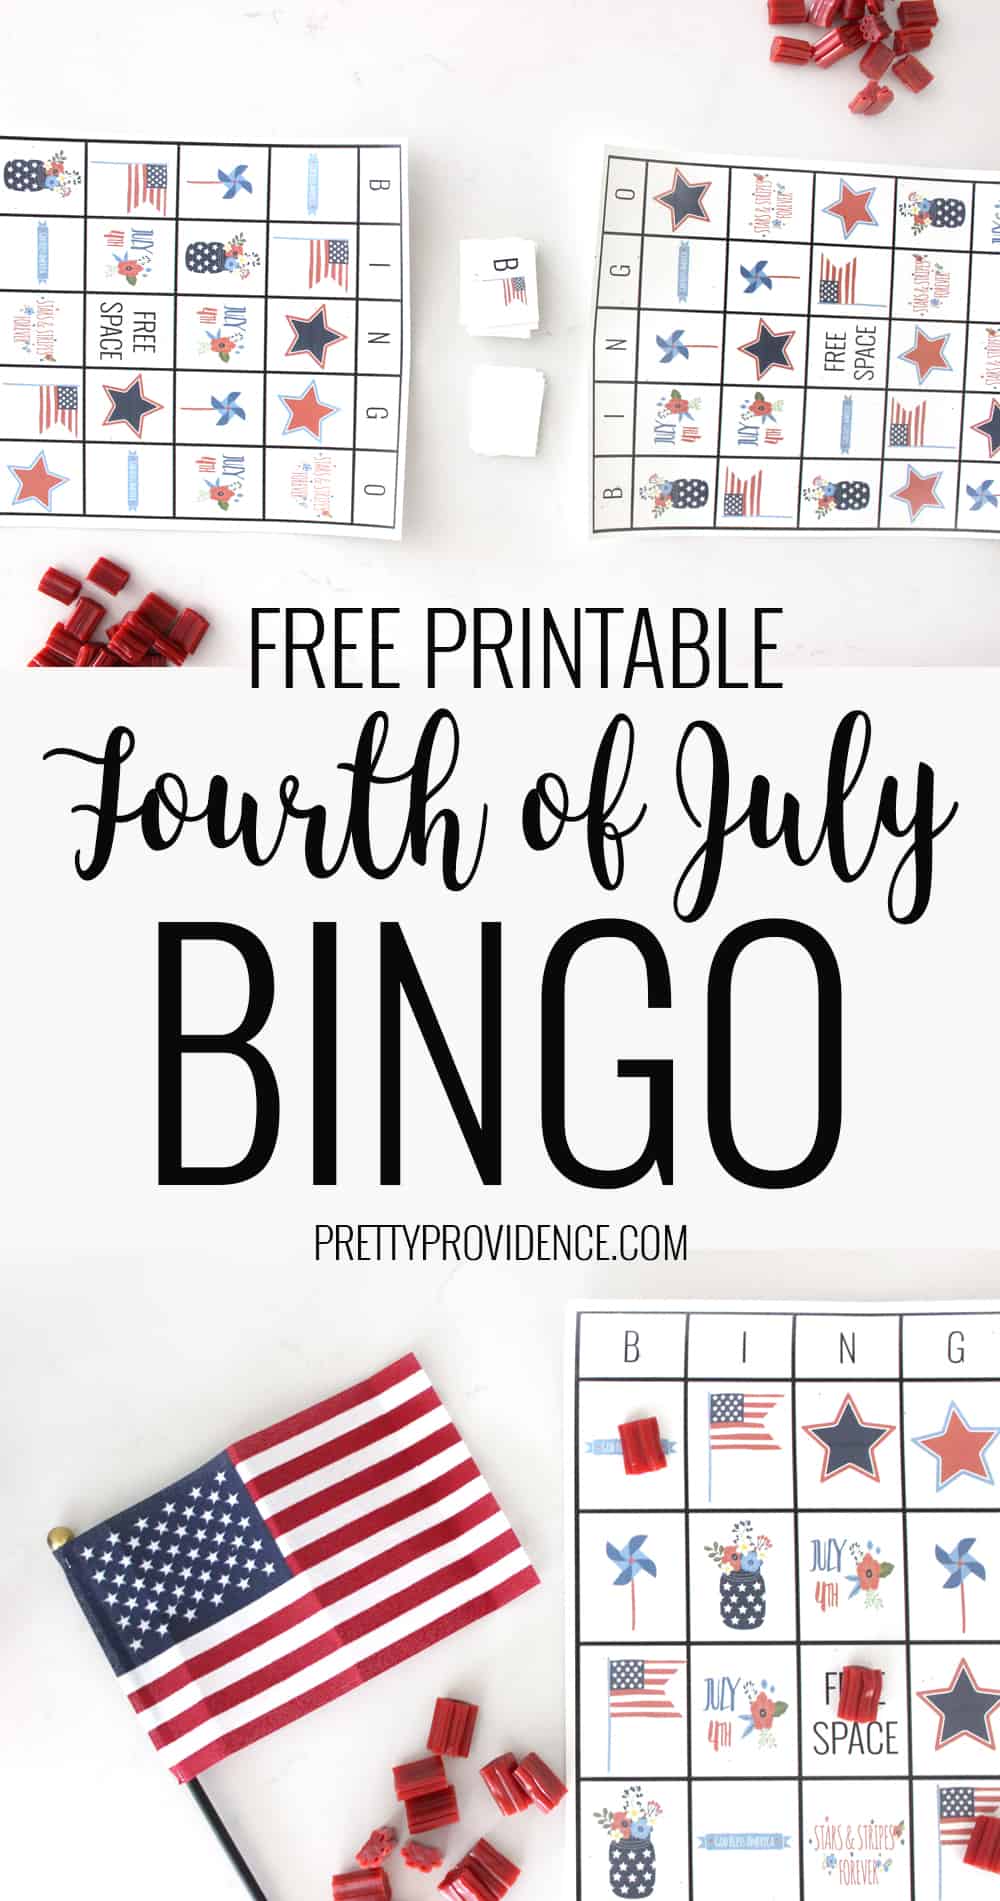 How fun are these adorable Fourth of July printable bingo cards? Perfect for entertaining littles between festivities on our country's birthday! #fourthofjuly #fourthofjulyactivities #bingo #printablebingo #kidsgames